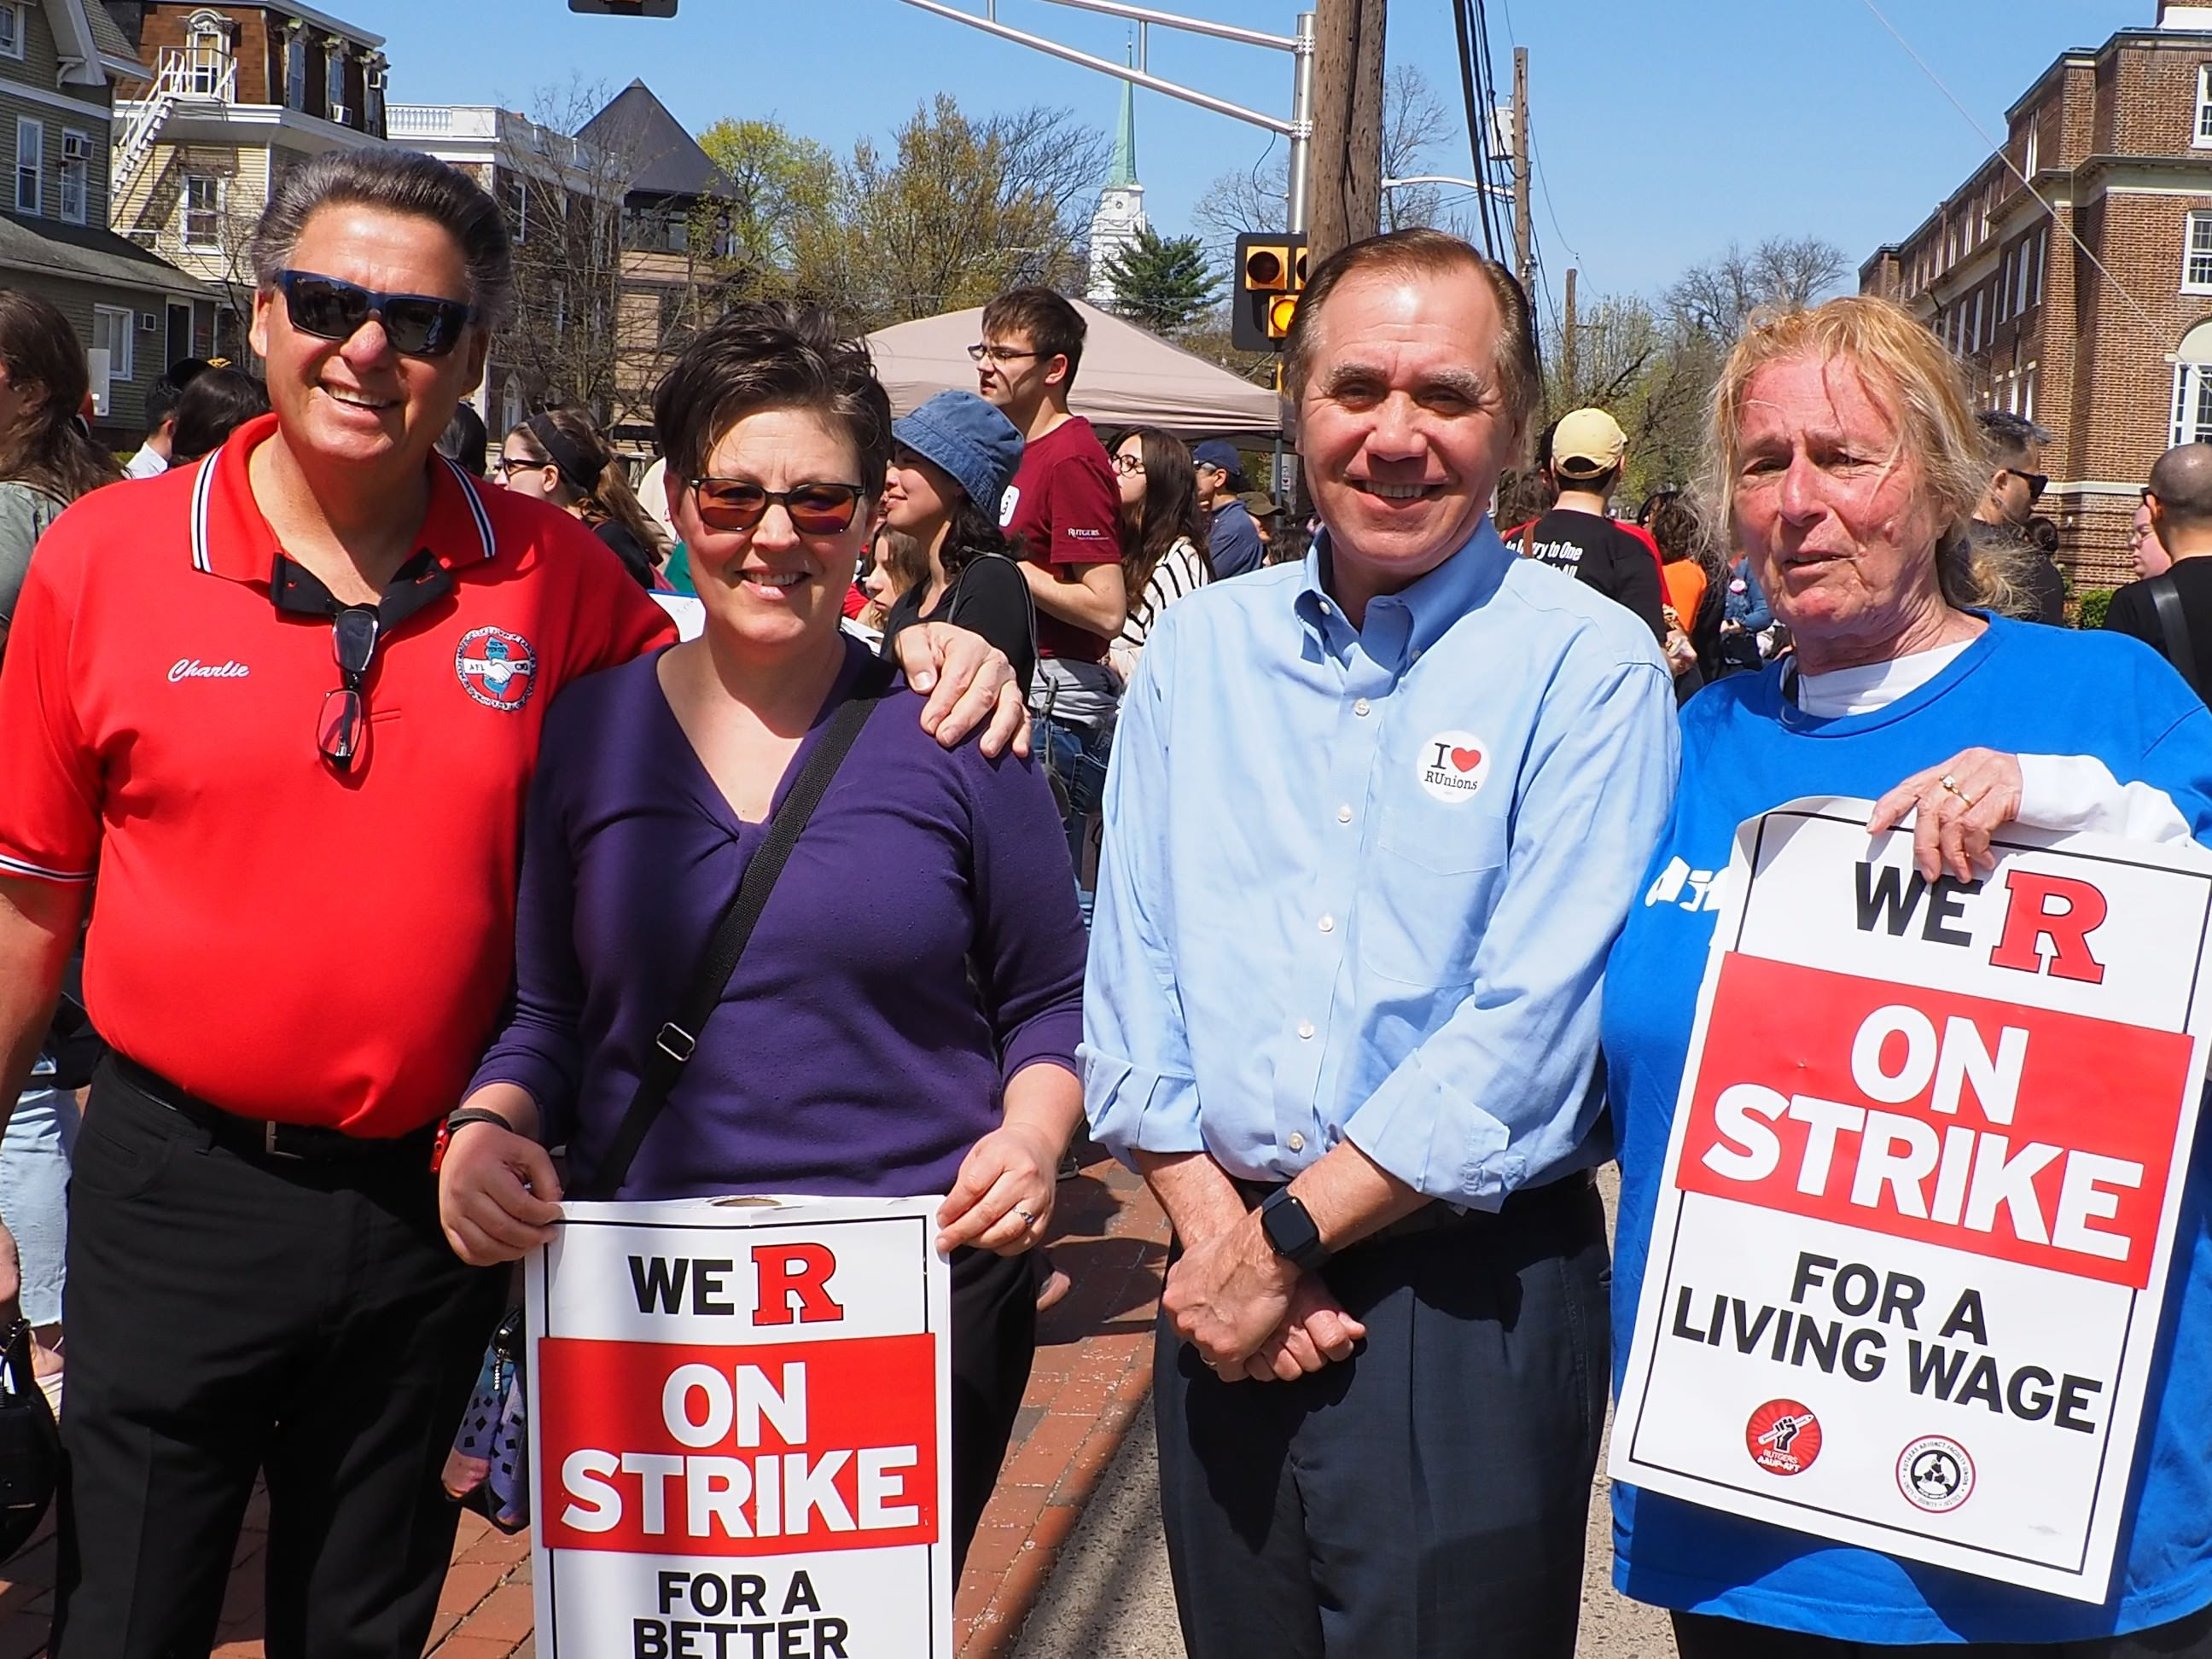 President Wowkanech visits the Rutgers picket line